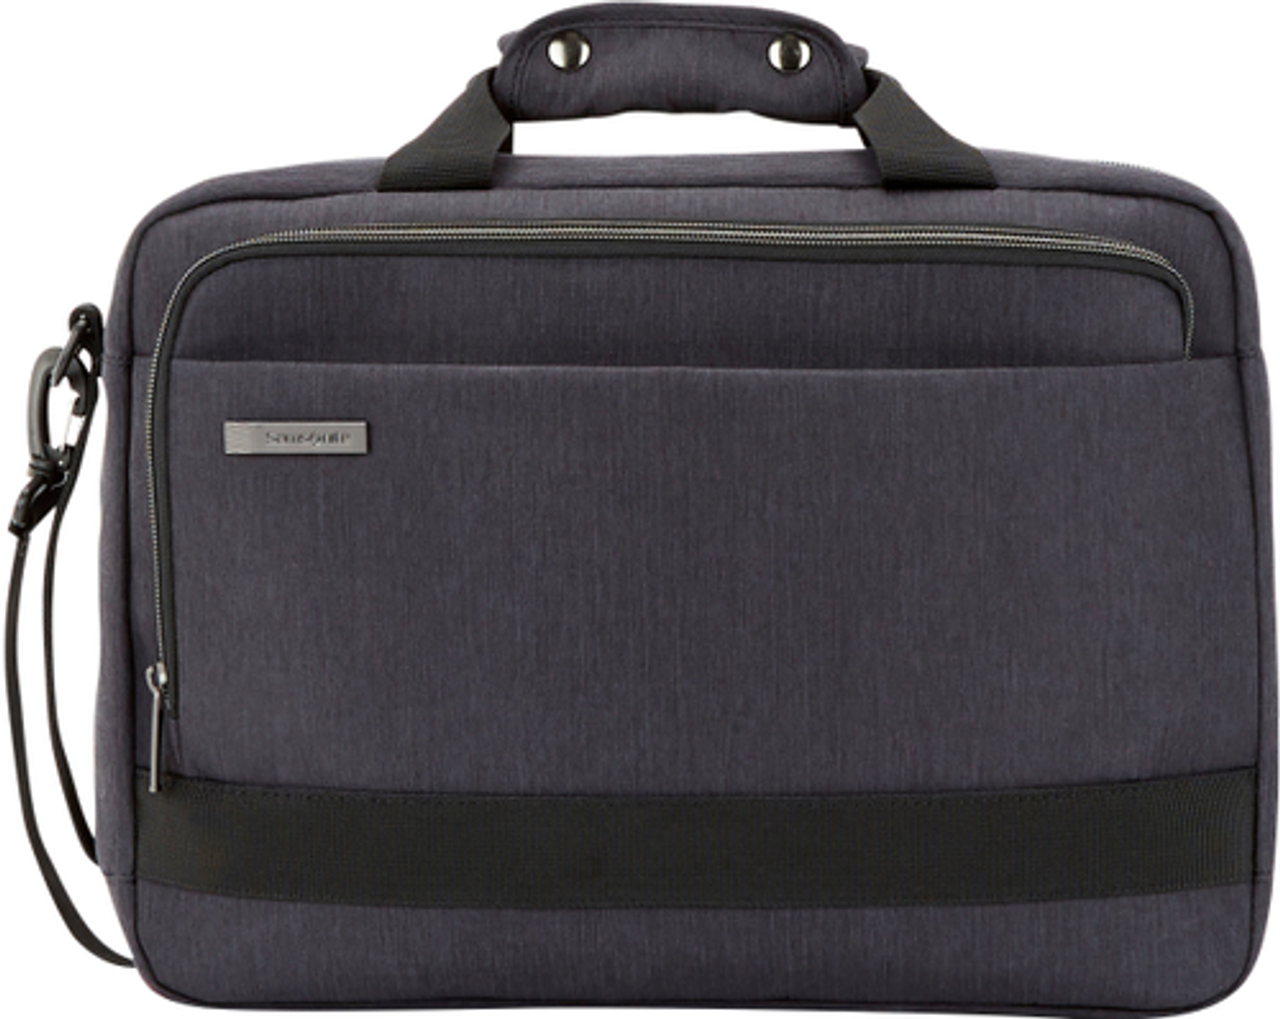 Samsonite - Modern Utility Convertible Briefcase for 15.6" Laptop - Charcoal Heather